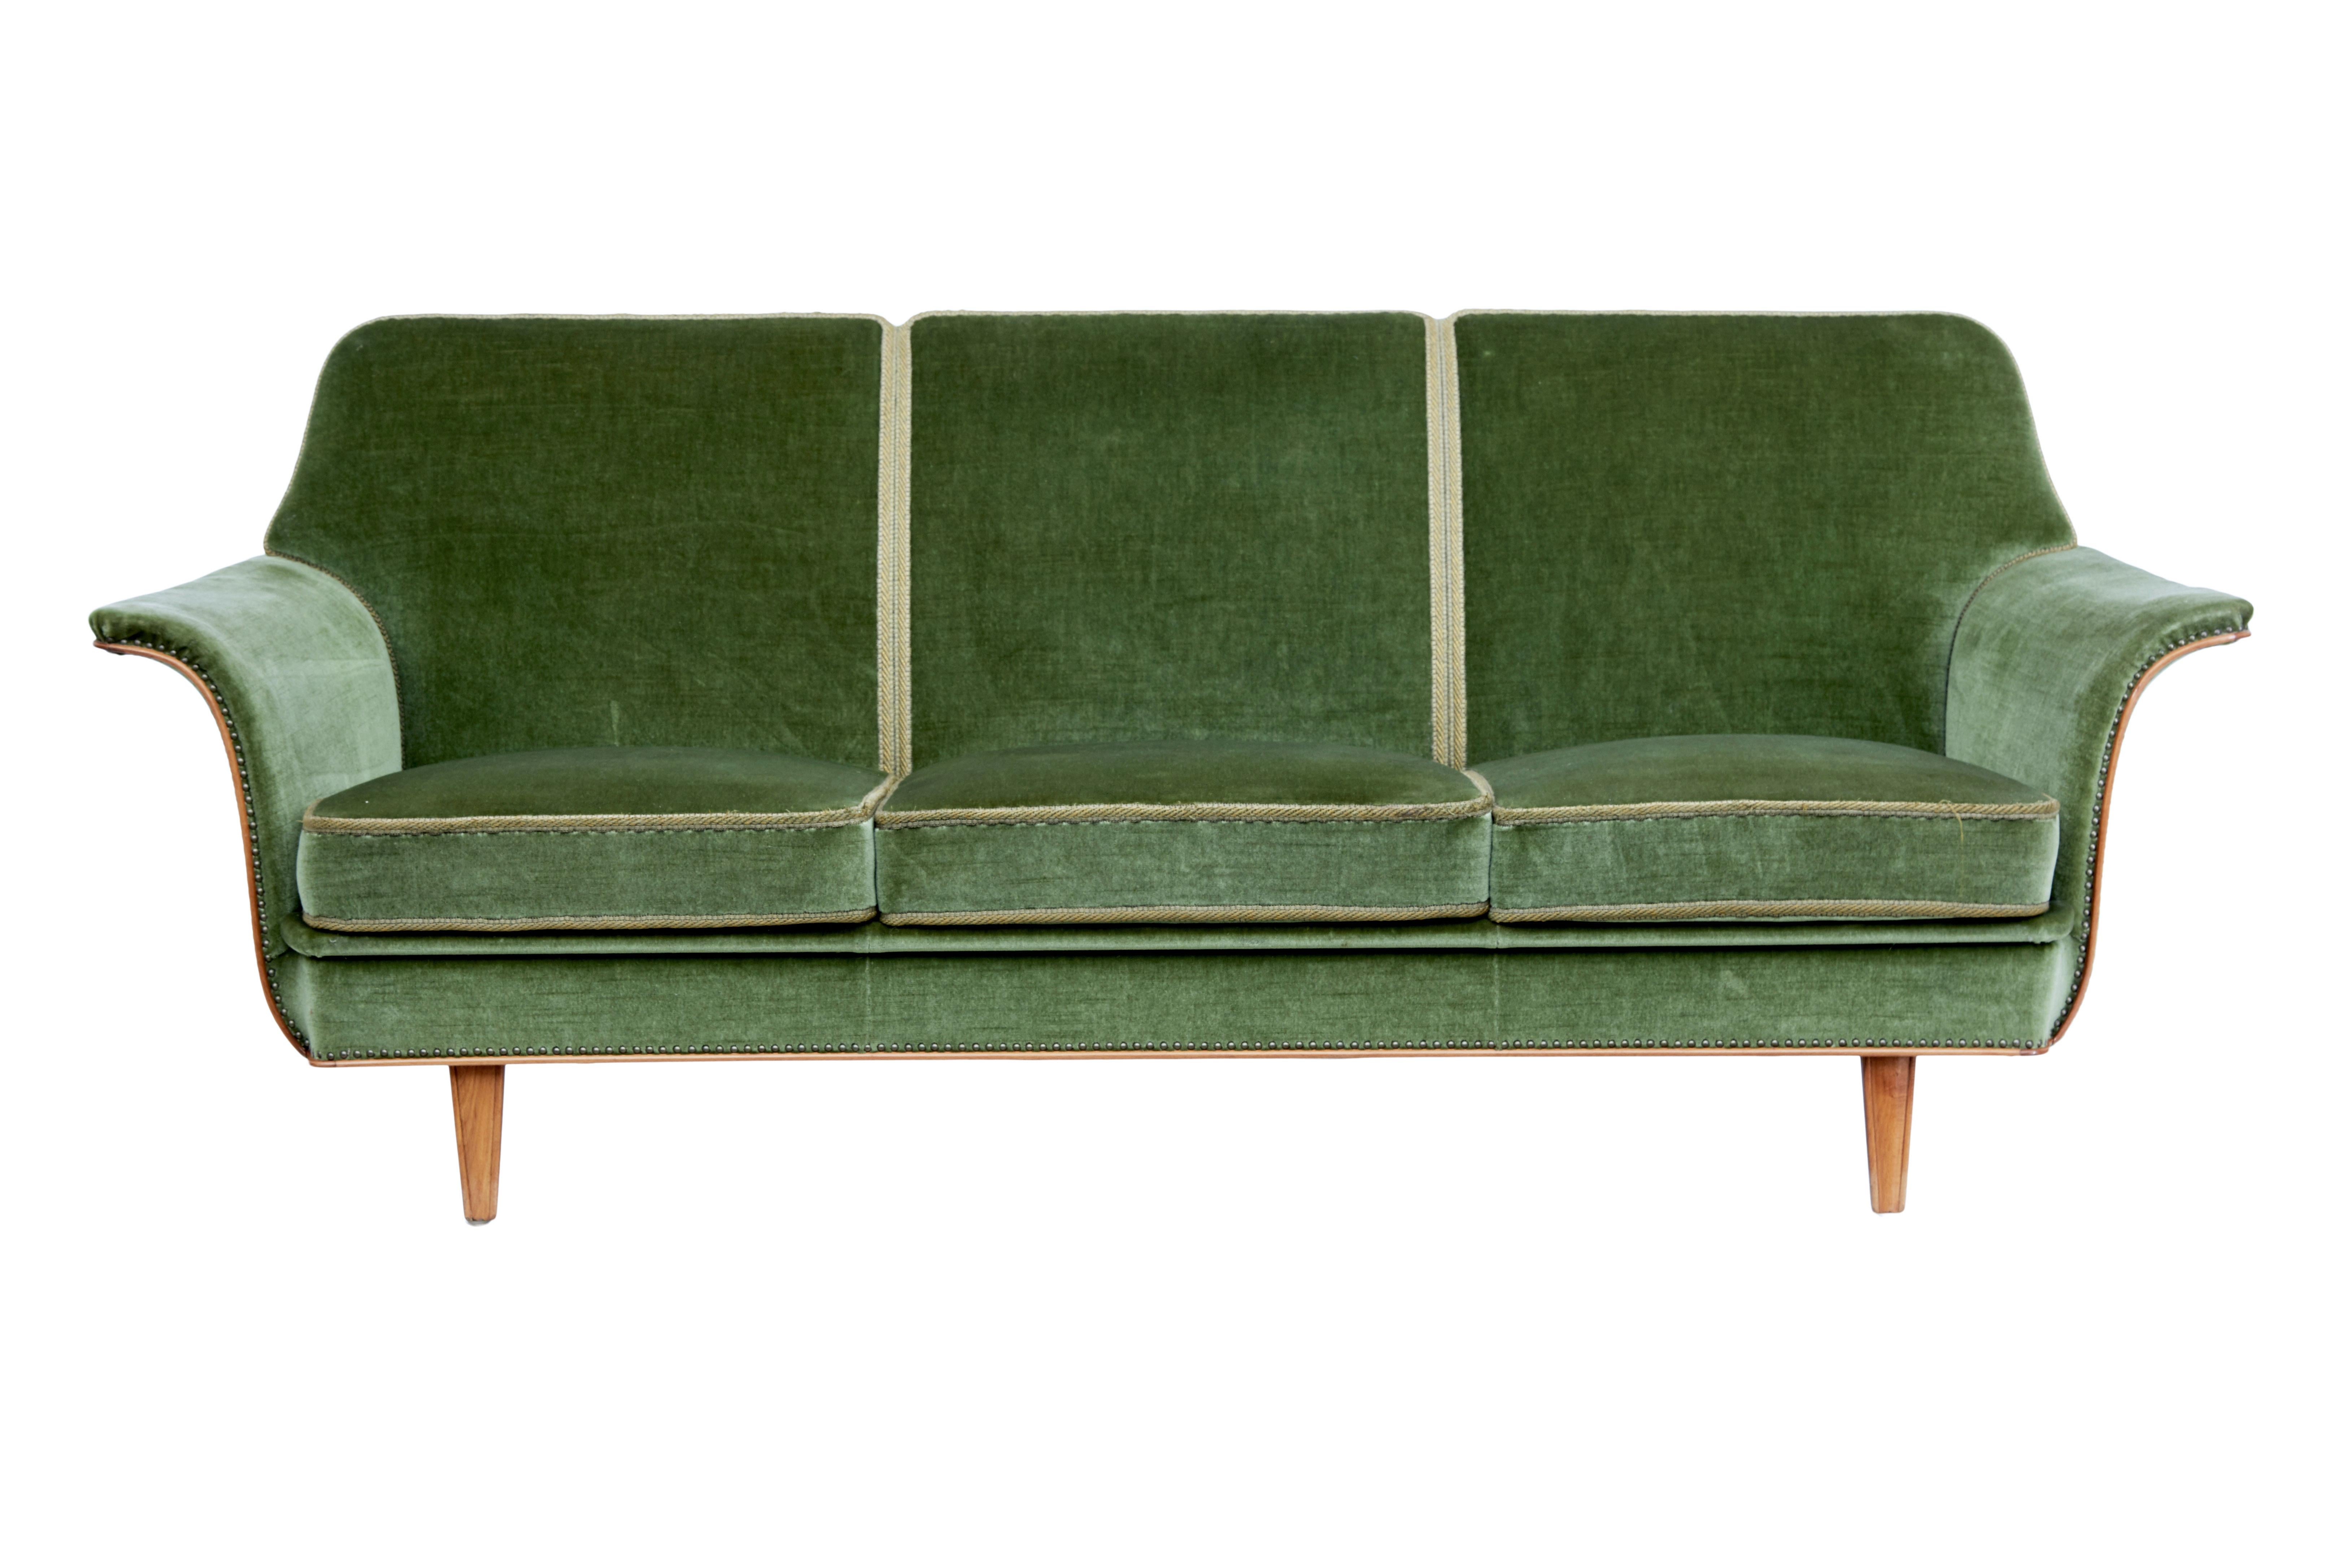 Mid 20th century Swedish 3 piece suite from late 1960's.

Suite comprises of a sofa with 2 matching armchairs which is upholstered in a striking green velour fabric with contrasting braiding.

Sofa seats a comfortable 3, with 3 removable seat